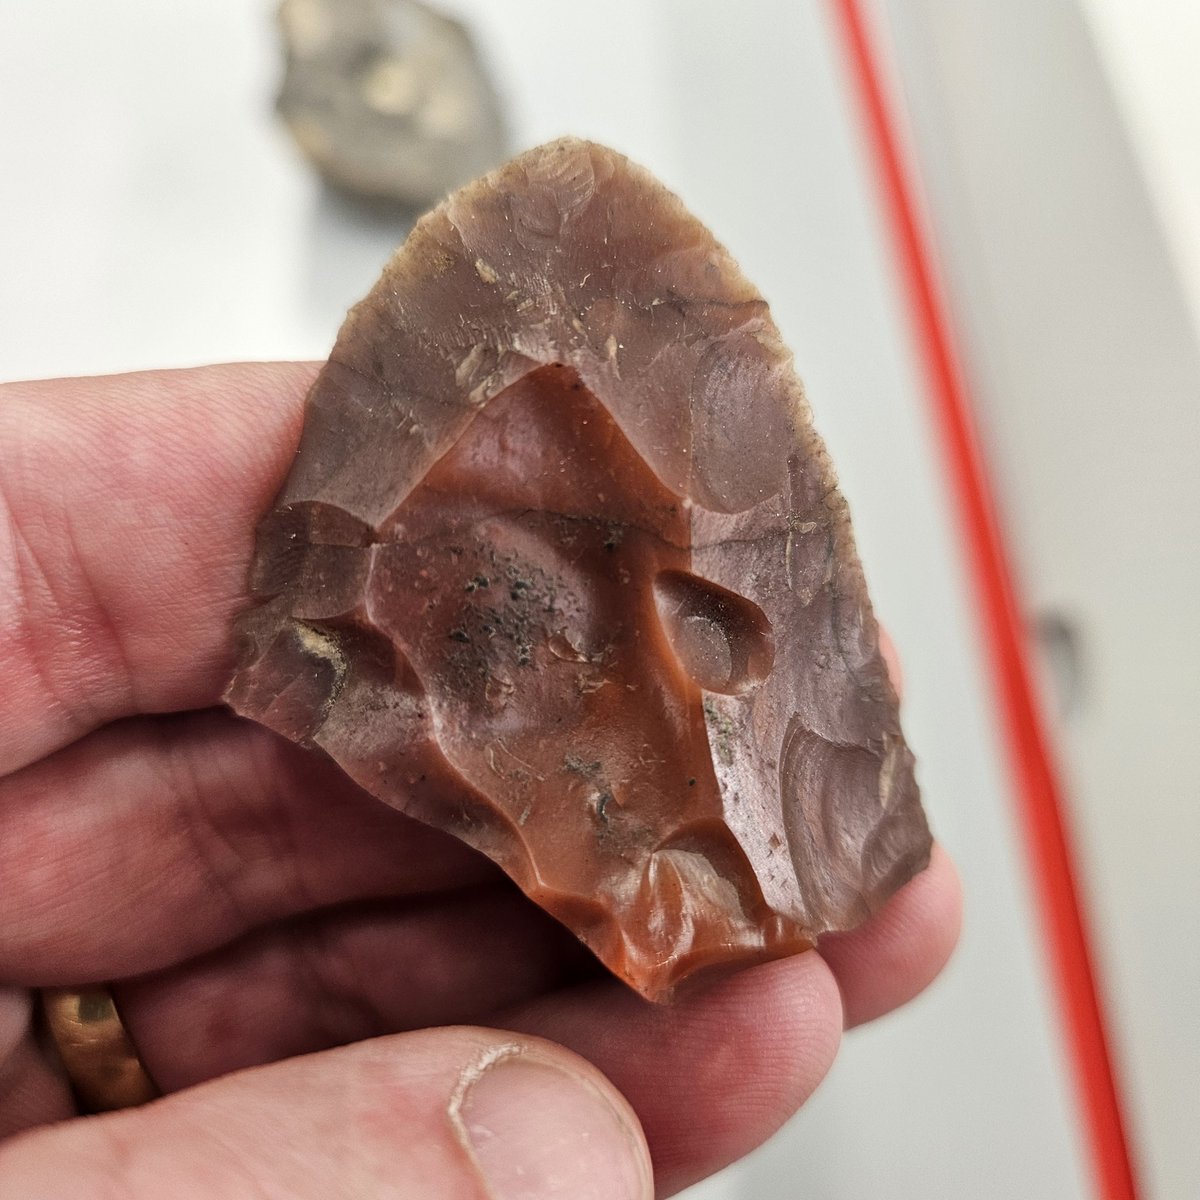 The tip of what would have been a very elegant and symmetrical Moustetian scraper. Made over 50,000 years ago in a stunning red jasper. Lost or discarded in the cave of La Cotte de St Brelade, where a hearth fire consumed and fractured the tool. #FindsFriday #IceAgeIsland